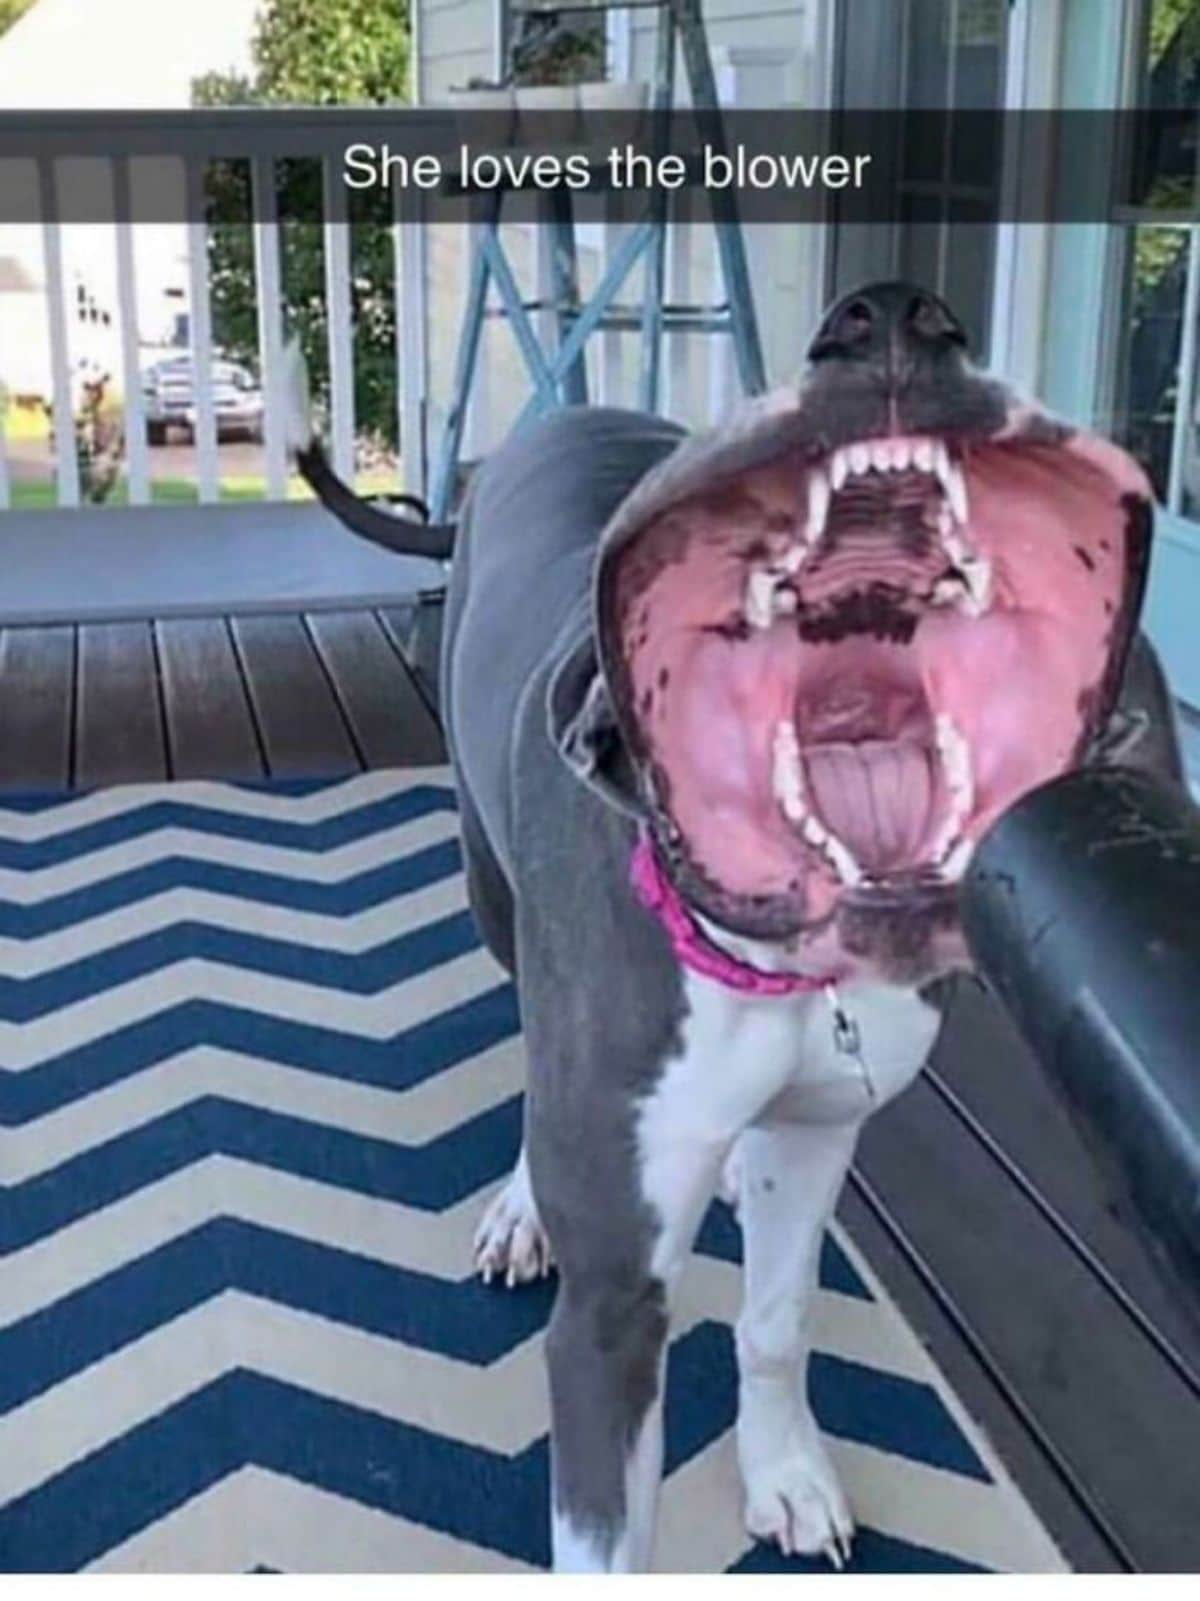 grey and white dog with its jowls pushed back because of the wind from a blower with a caption saying she loves the blower